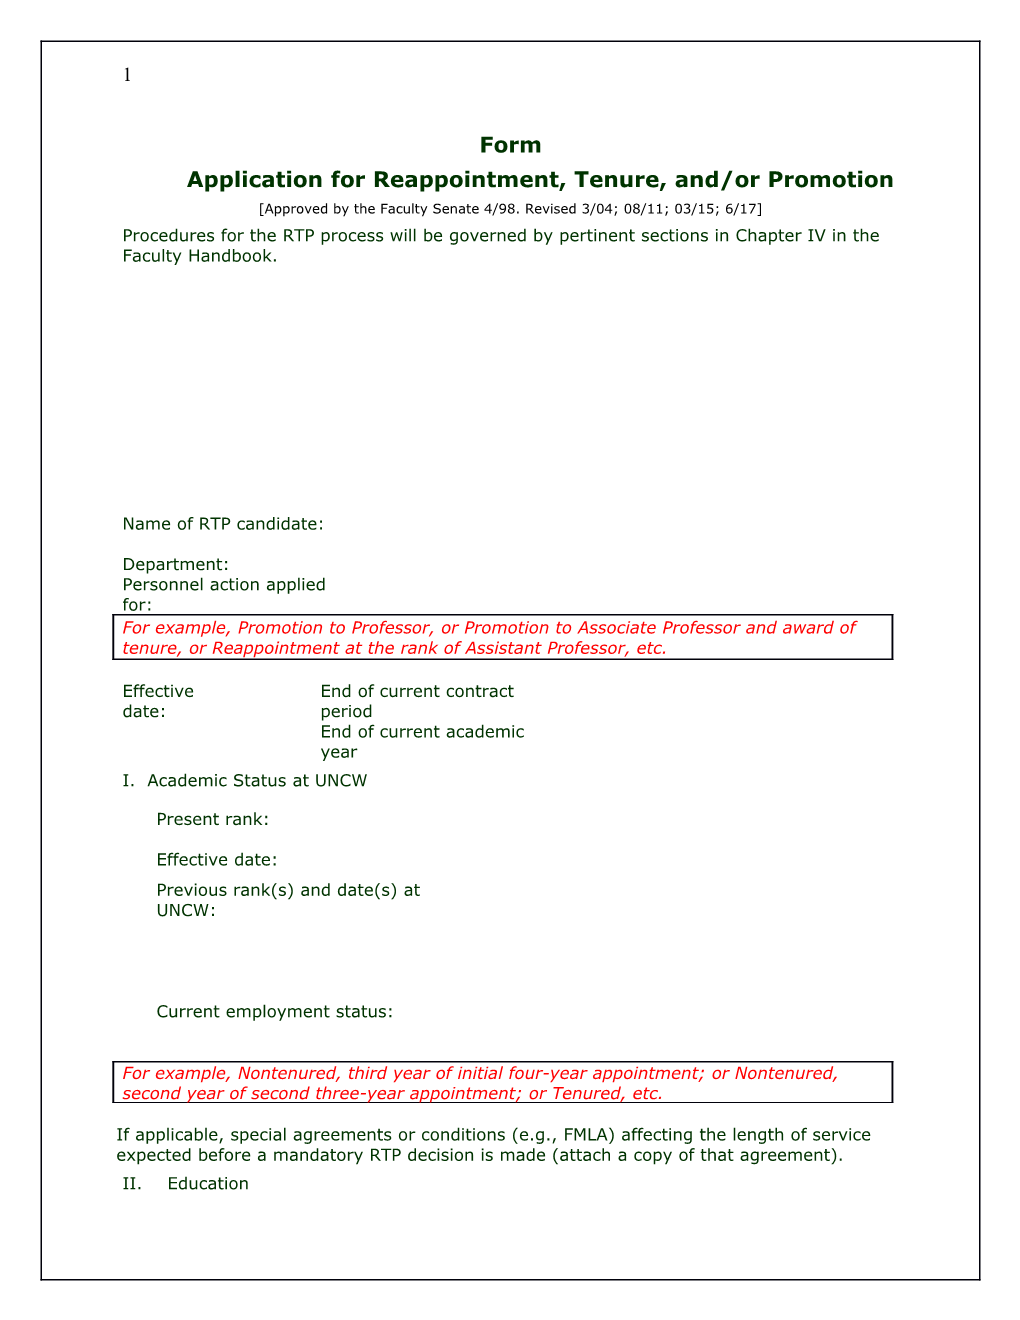 Application for Reappointment, Tenure, And/Or Promotion